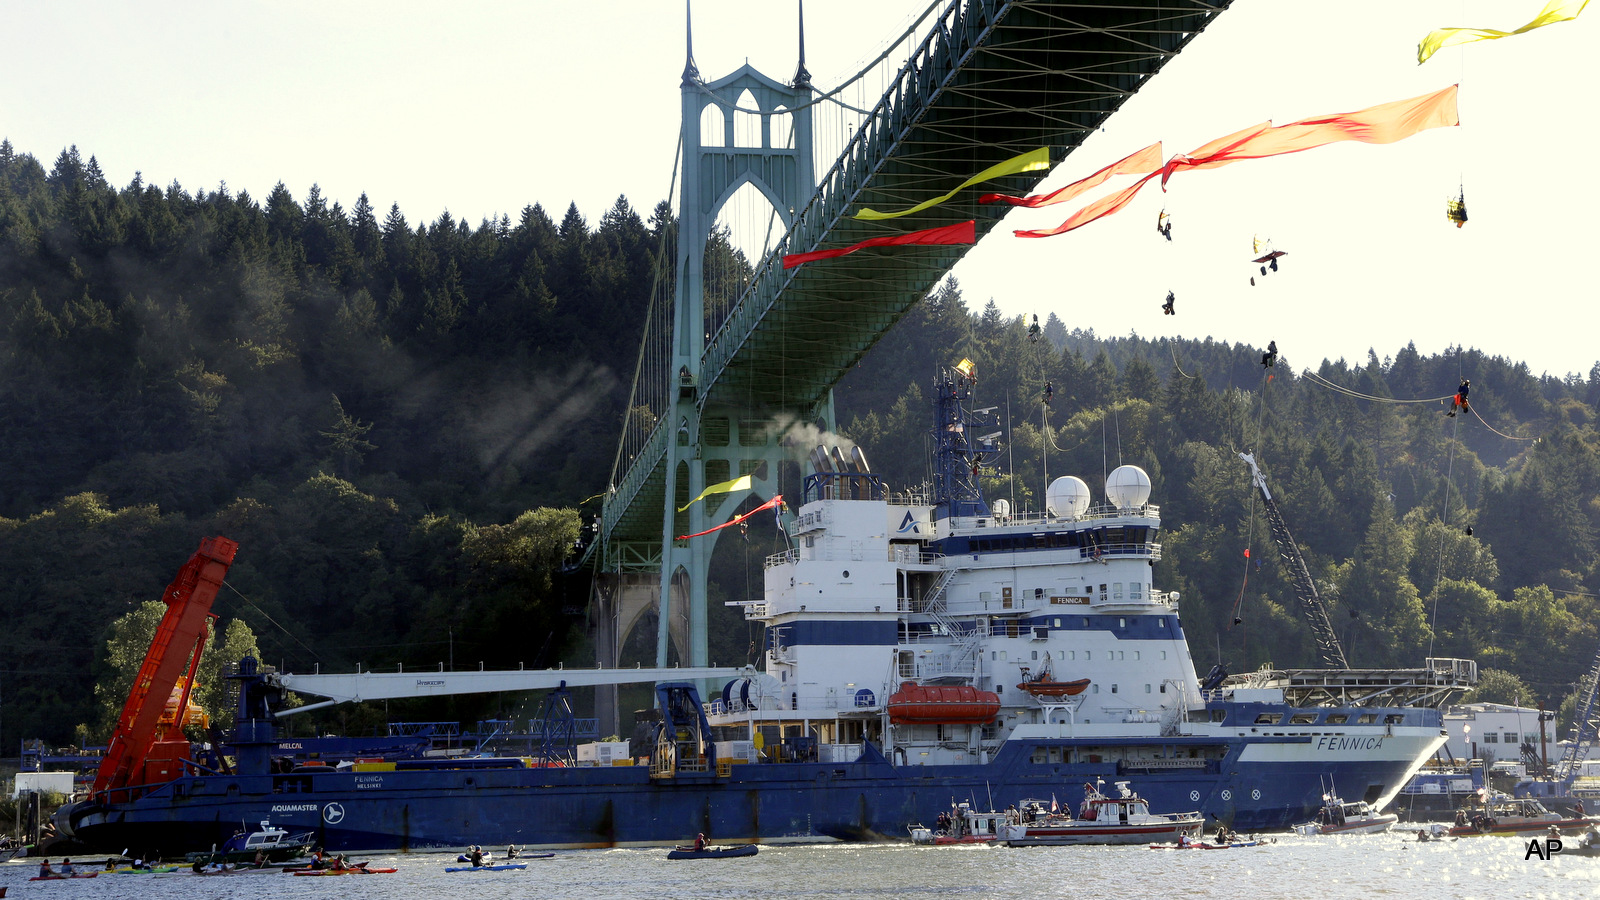 The Royal Dutch Shell PLC icebreaker Fennica heads up the Willamette River under protesters hanging from the St. Johns Bridge on its' way to Alaska in Portland, Ore., Thursday, July 30, 2015.